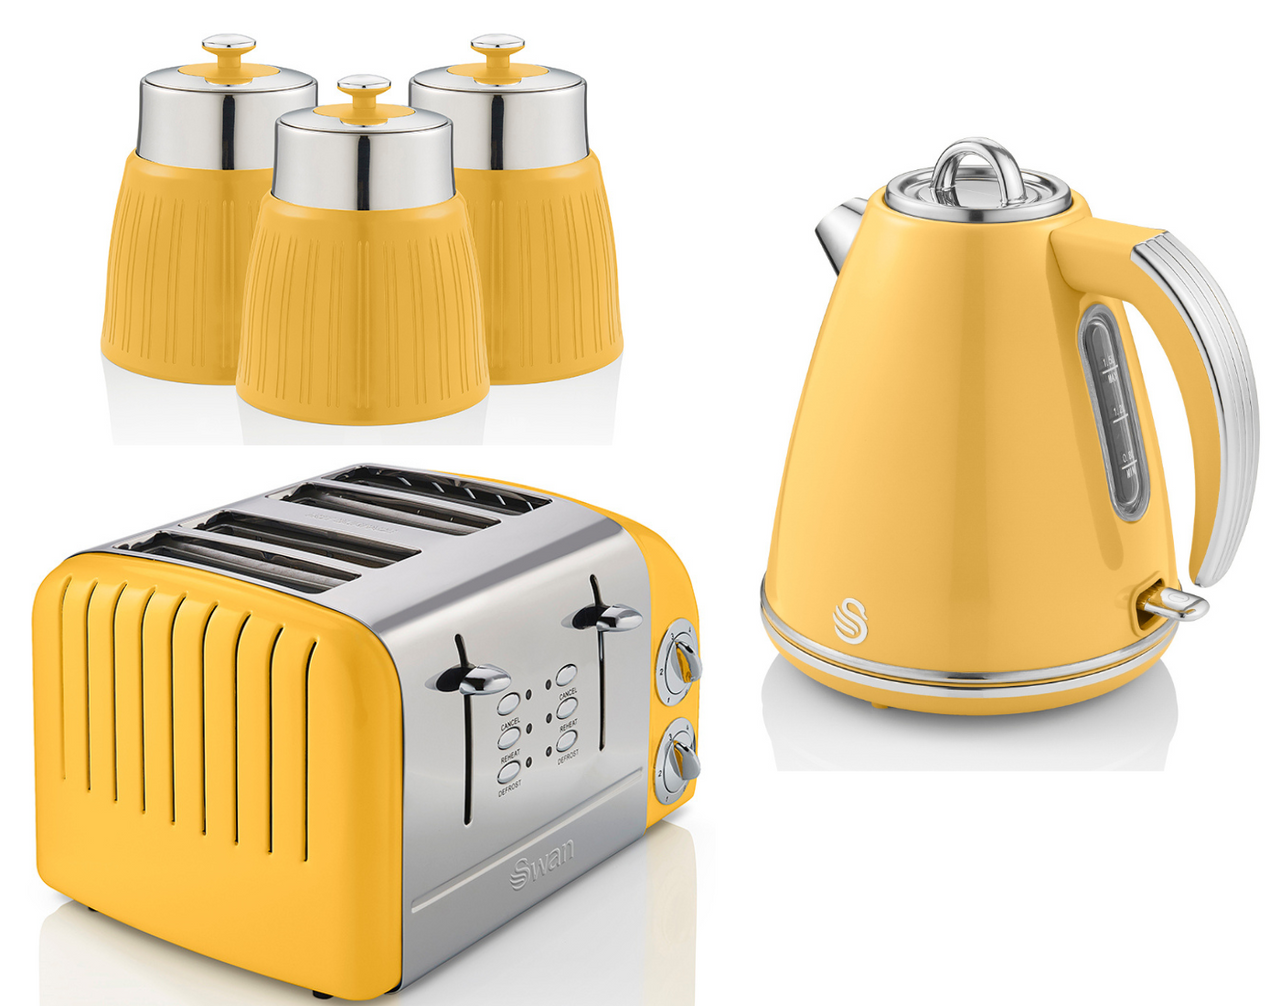 Swan Retro Yellow Jug Kettle, 4 Slice Toaster & 3 Canisters Kitchen Set of 5